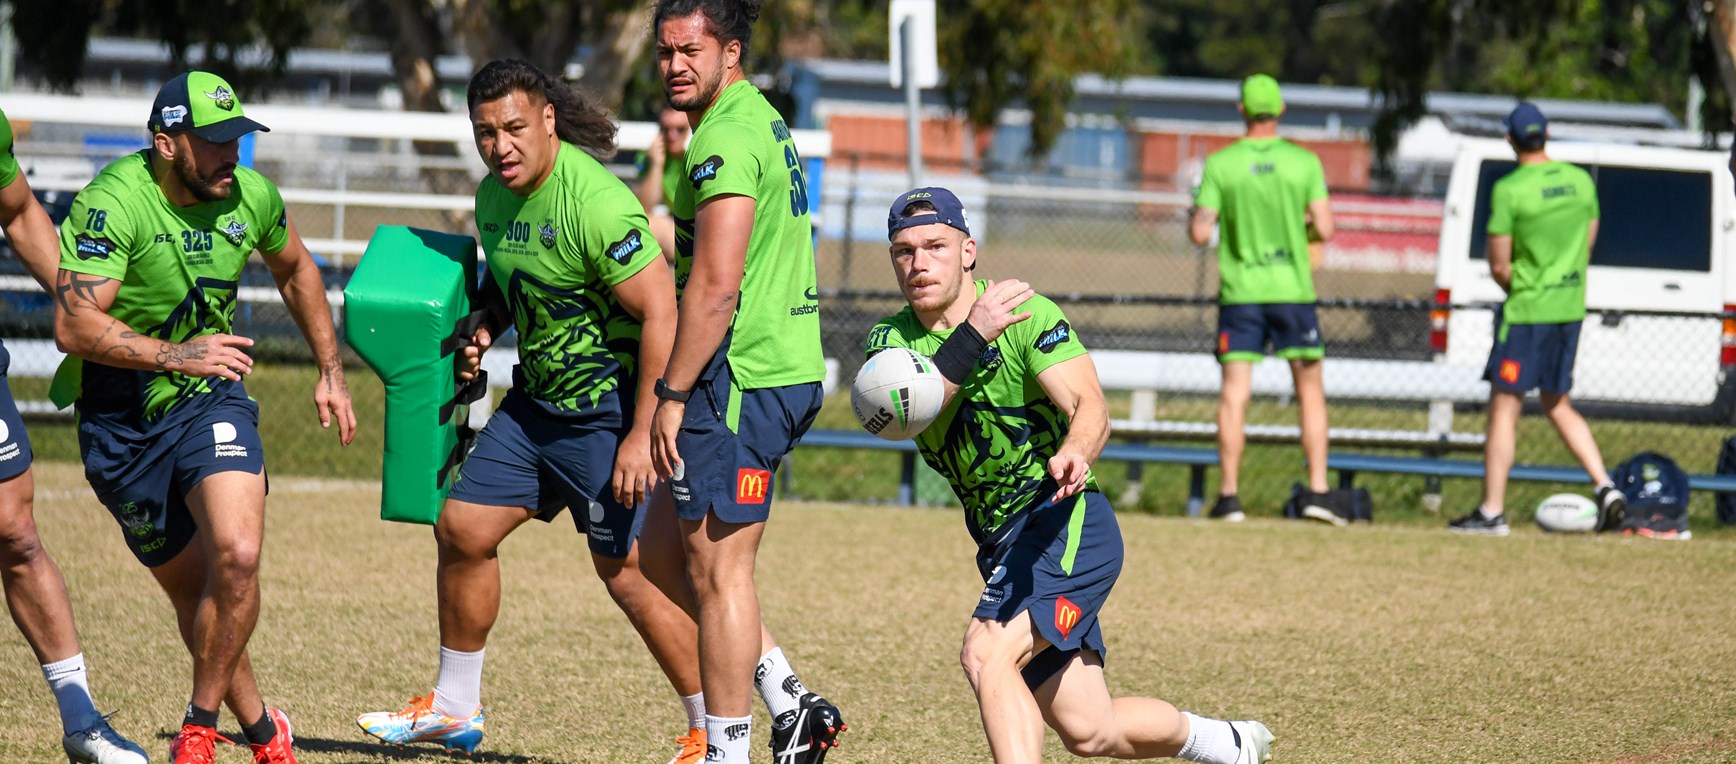 Captain's Run: Raiders gear up for Dragons match